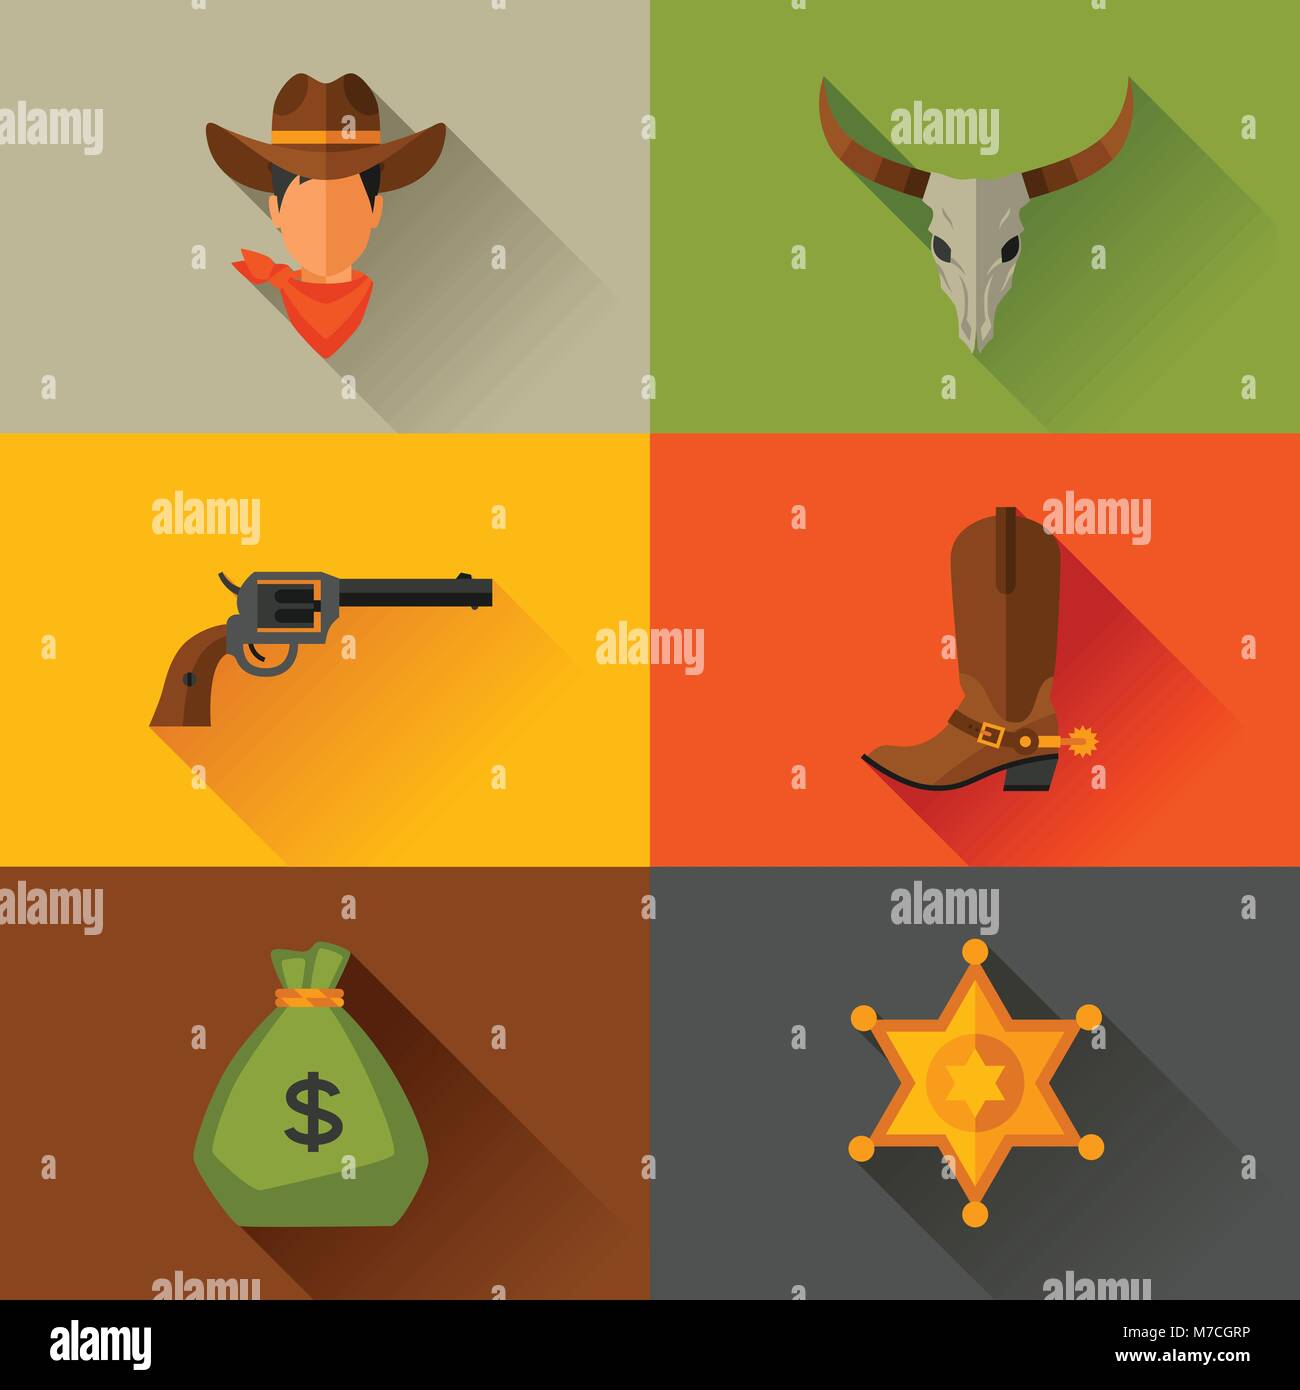 Wild west cowboy objects and design elements Stock Vector